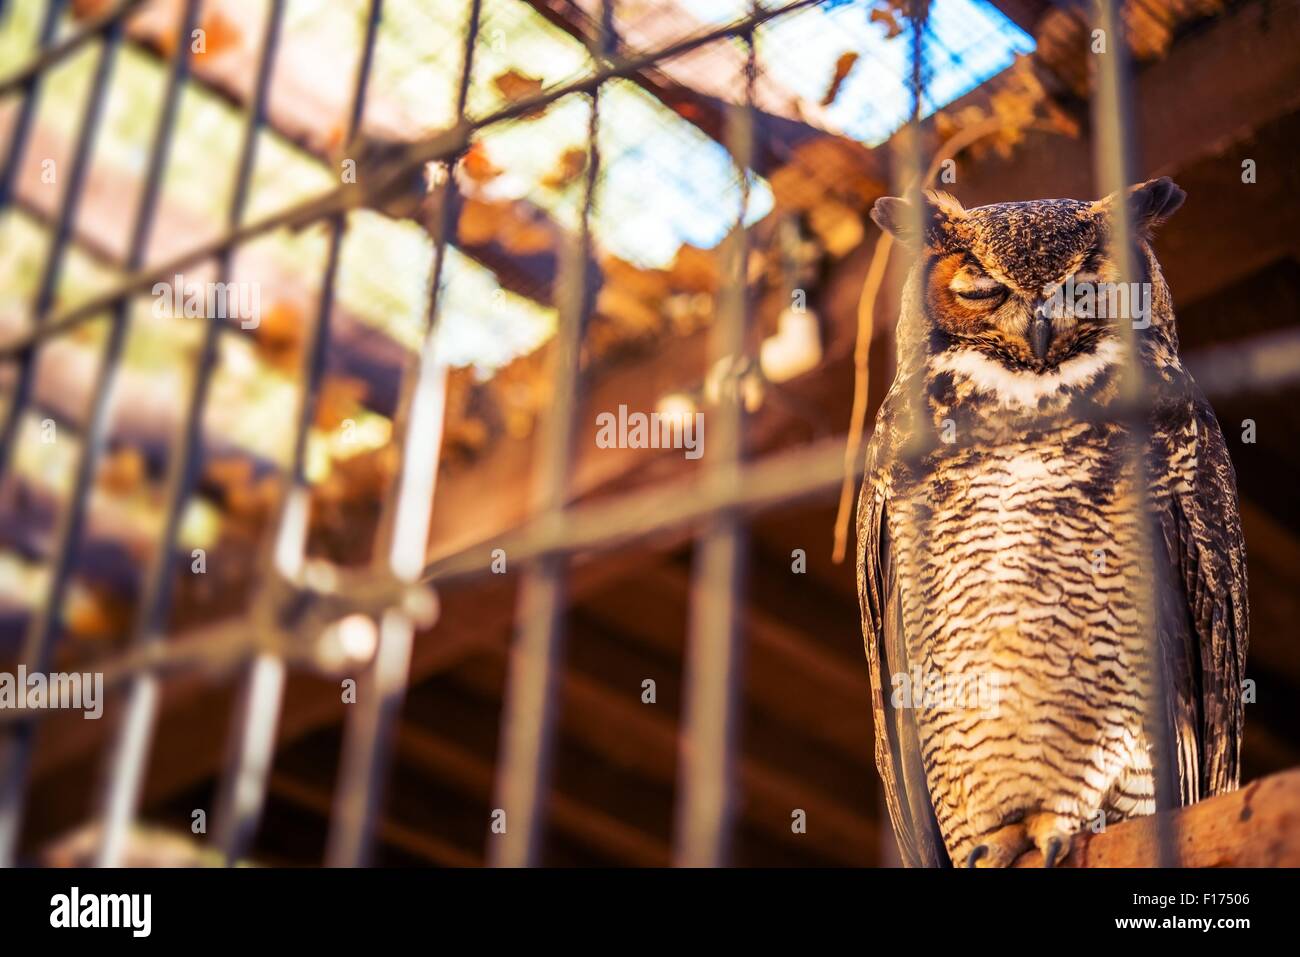 Poor Owl in Captivity. Great Horned Owl in Captivity. Bird in the Cage. Stock Photo